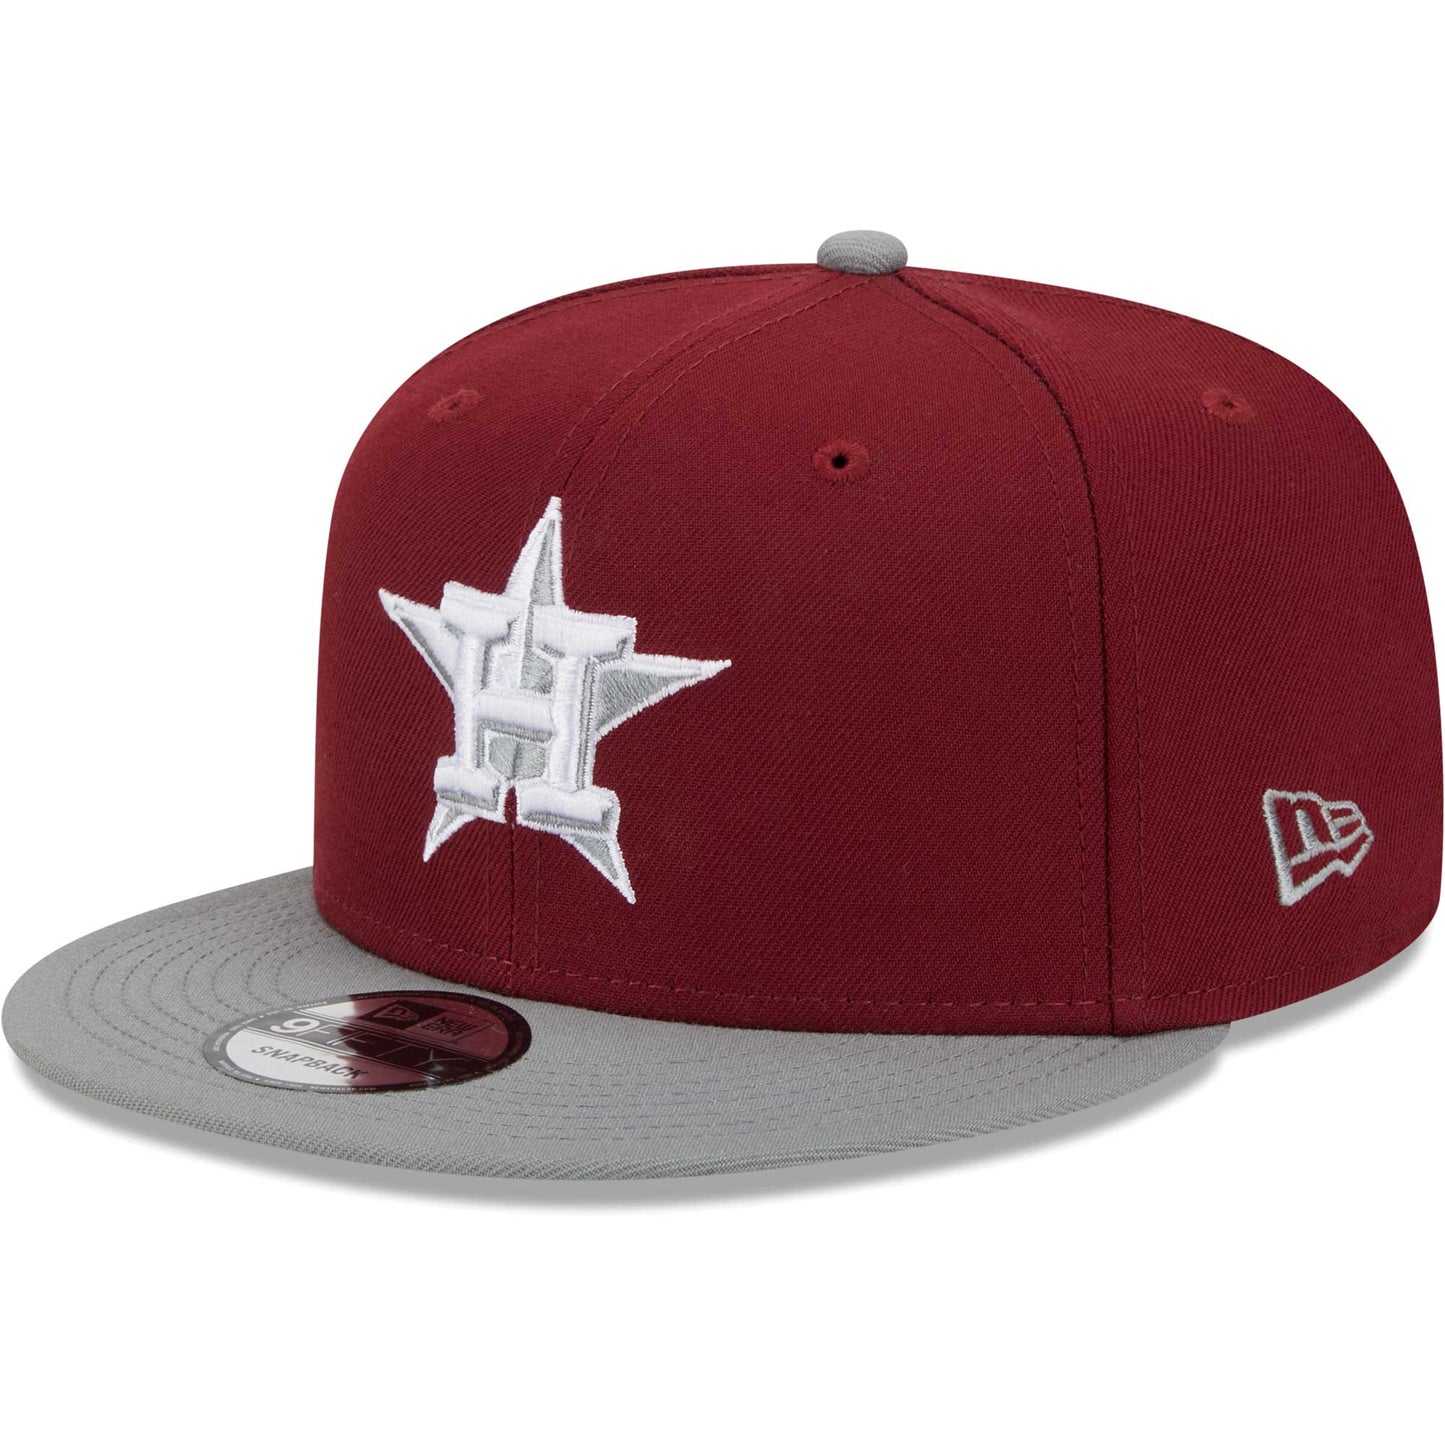 Houston Astros New Era Two-Tone Color Pack 9FIFTY Snapback Hat - Cardinal